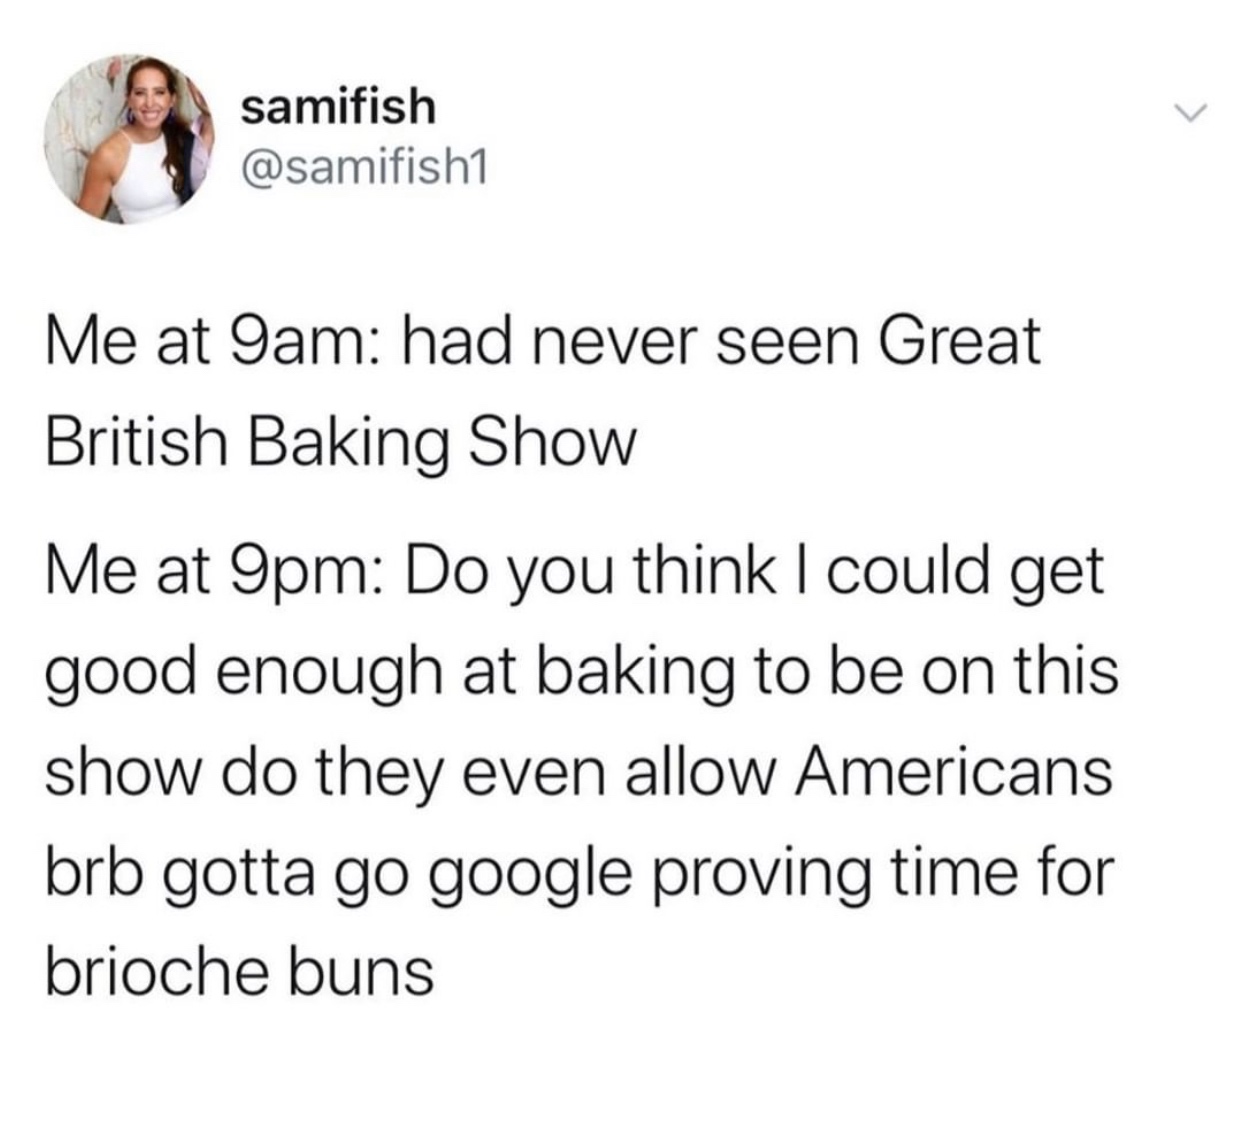 meme - angle - samifish Me at 9am had never seen Great British Baking Show Me at 9pm Do you think I could get good enough at baking to be on this show do they even allow Americans brb gotta go google proving time for brioche buns